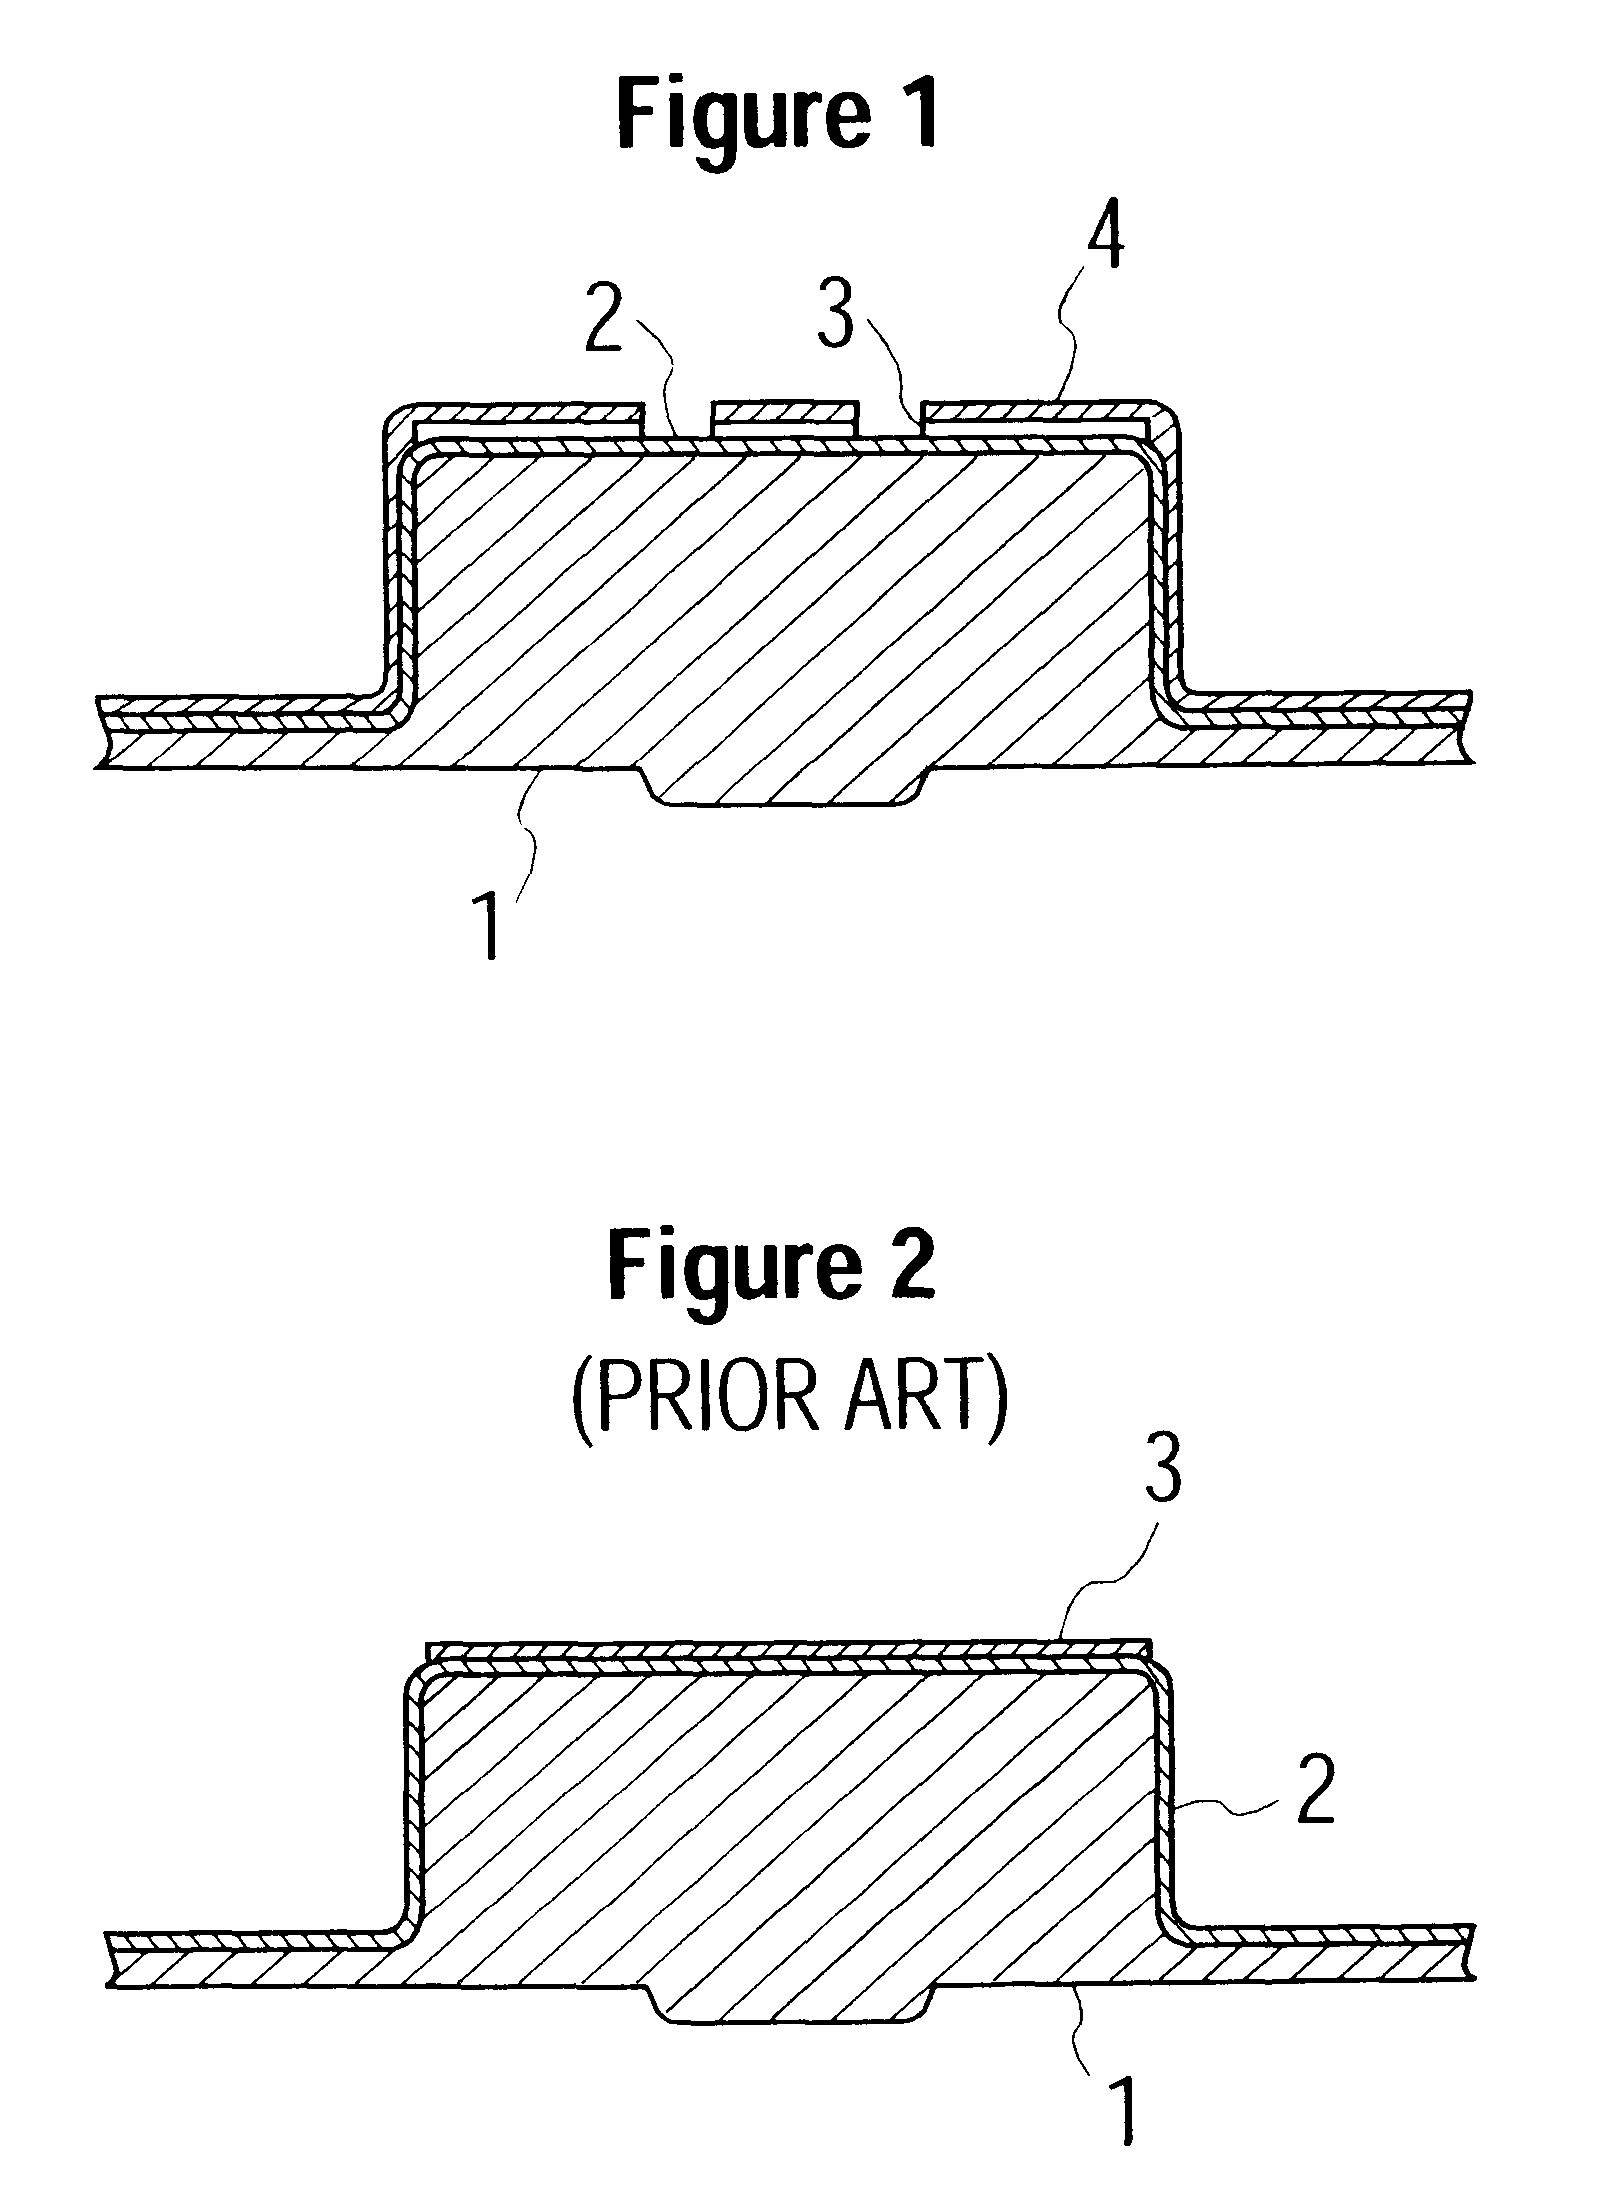 Manufacturing method of color keypad for a contact of character illumination rubber switch